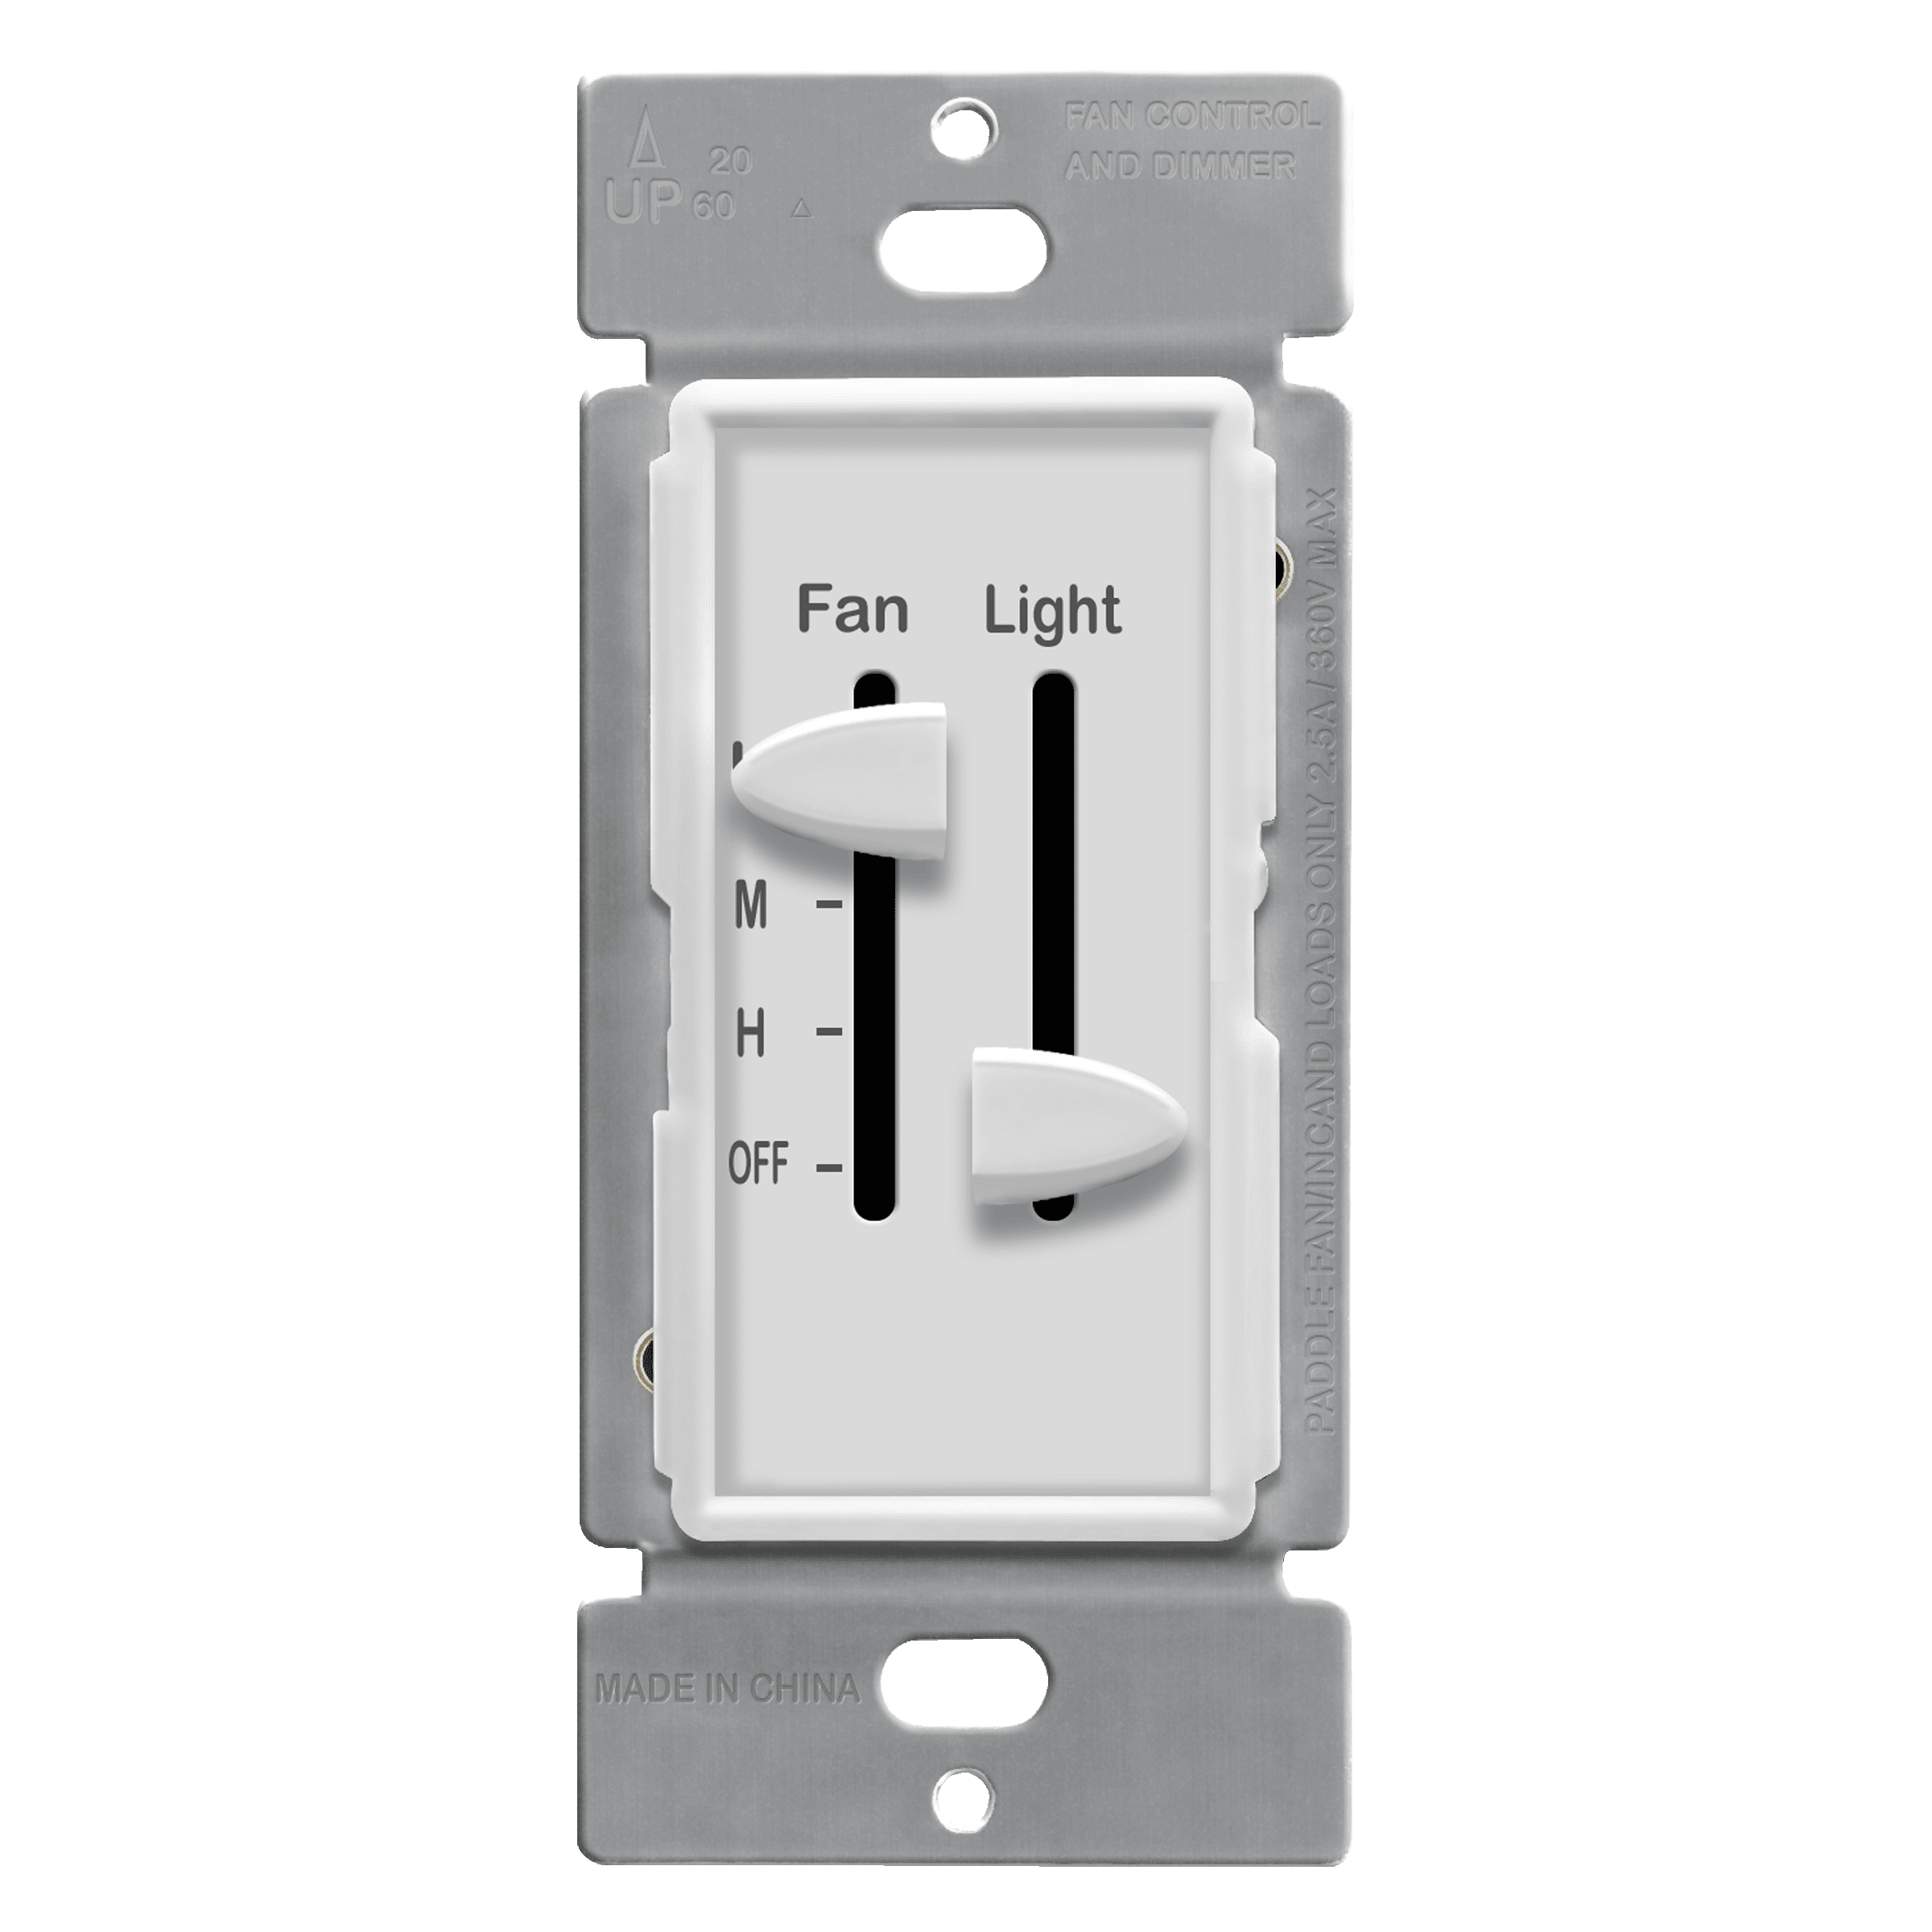 Ceiling Fan Control And Dimmer Switch